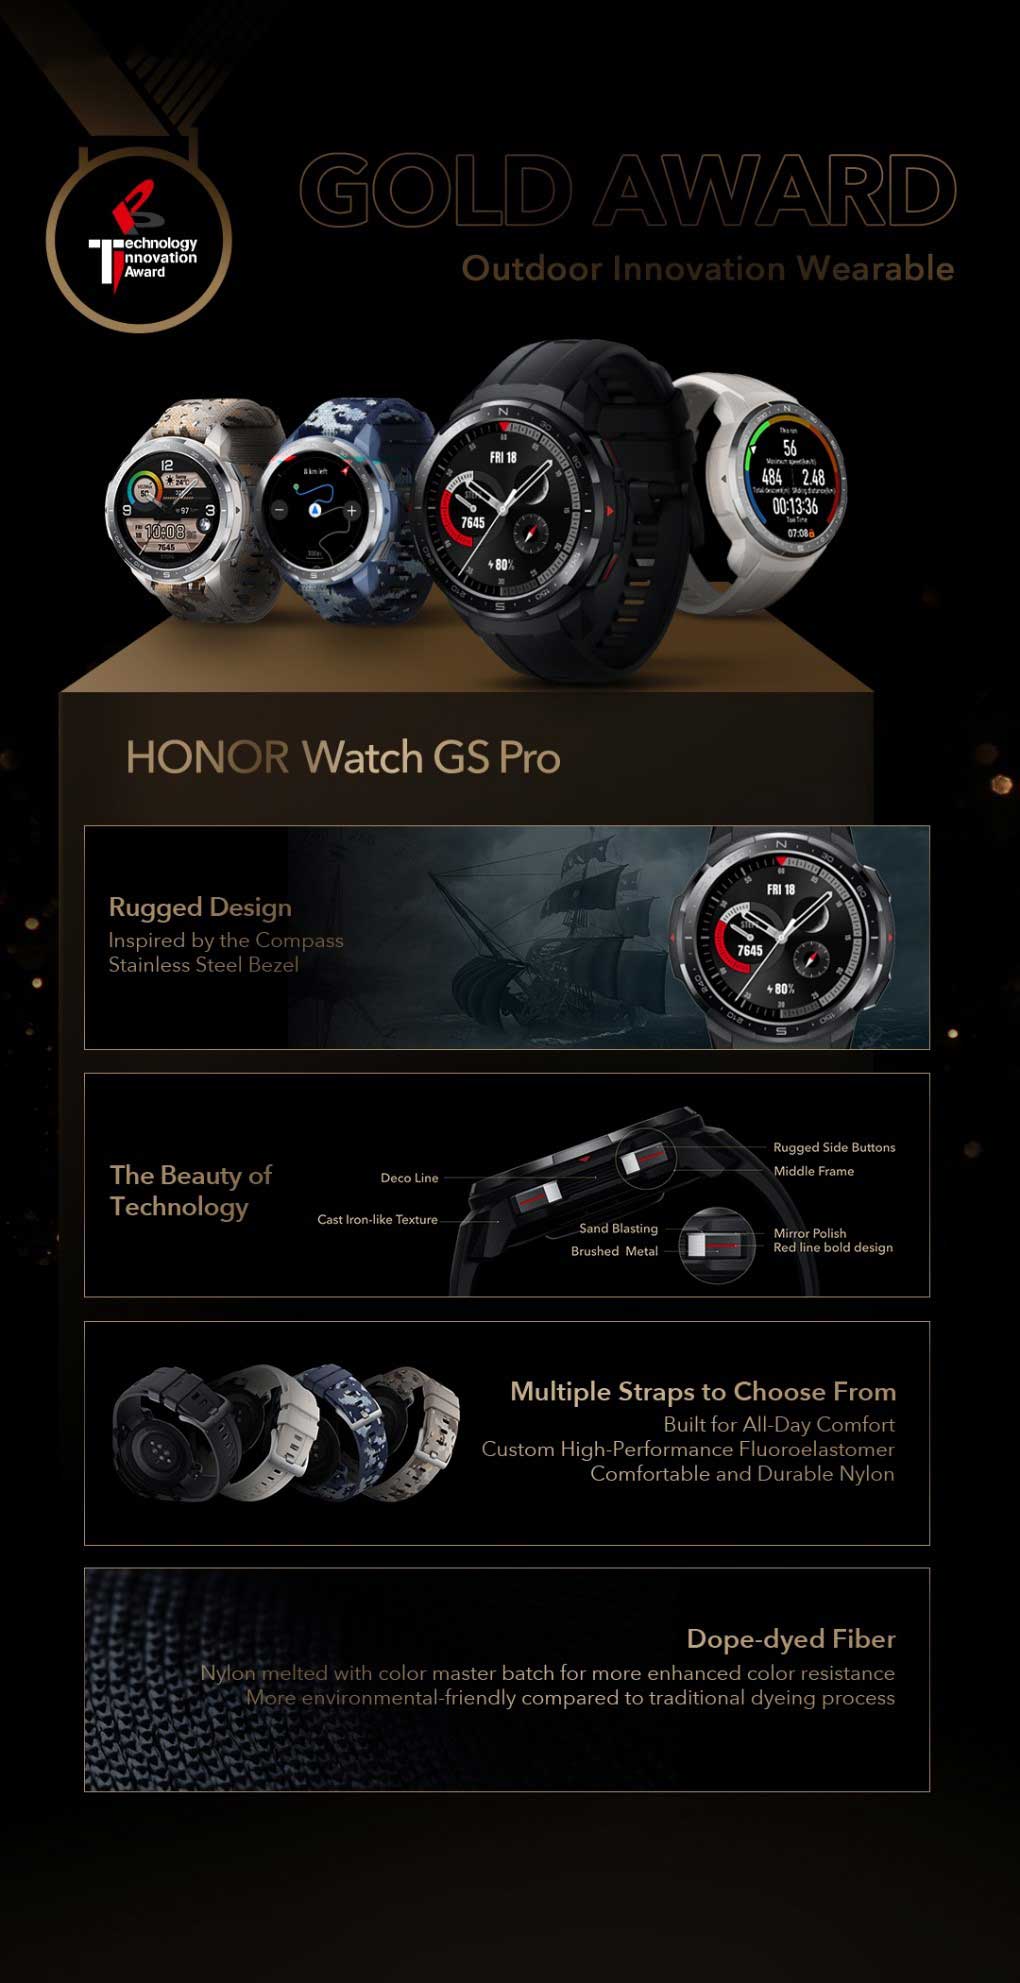 HONOR Watch GS Pro Goes on Sale from 28 September; Camo Blue and Camo Grey Editions Launching from October